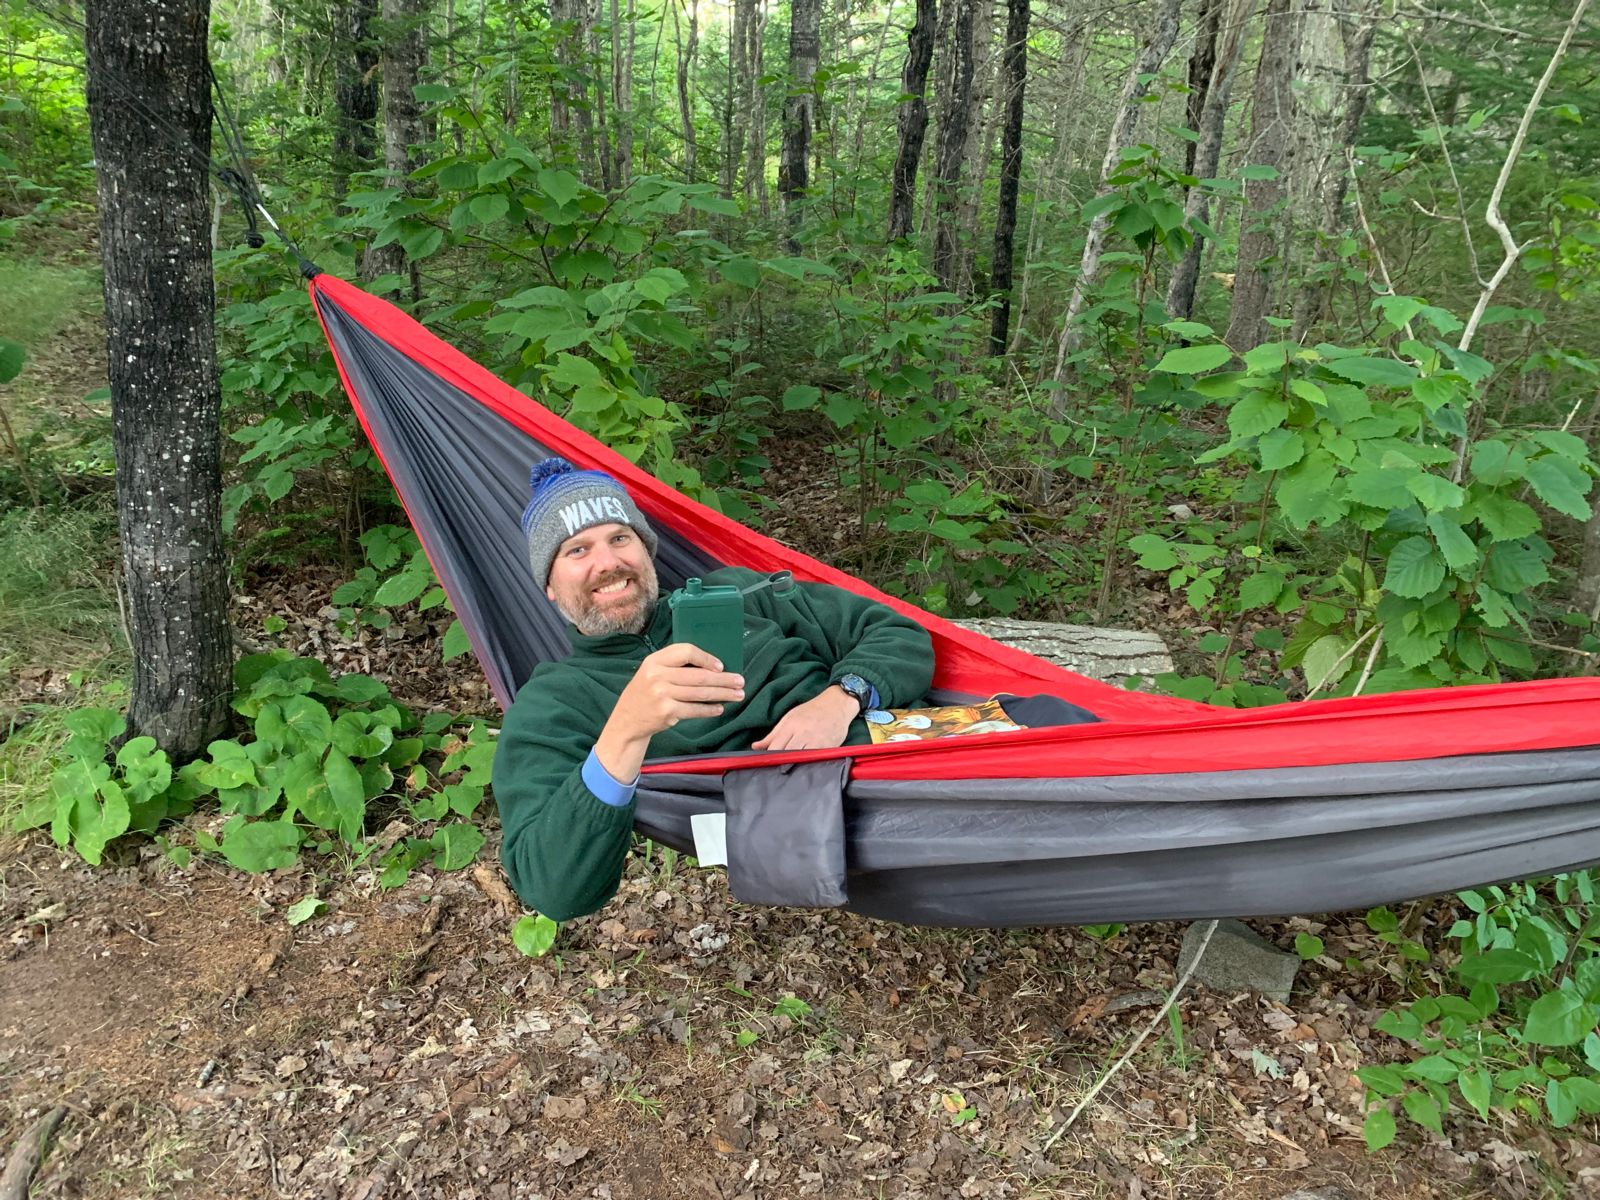 Bryan relaxing in his hammock at the Lake Ritchie Campground